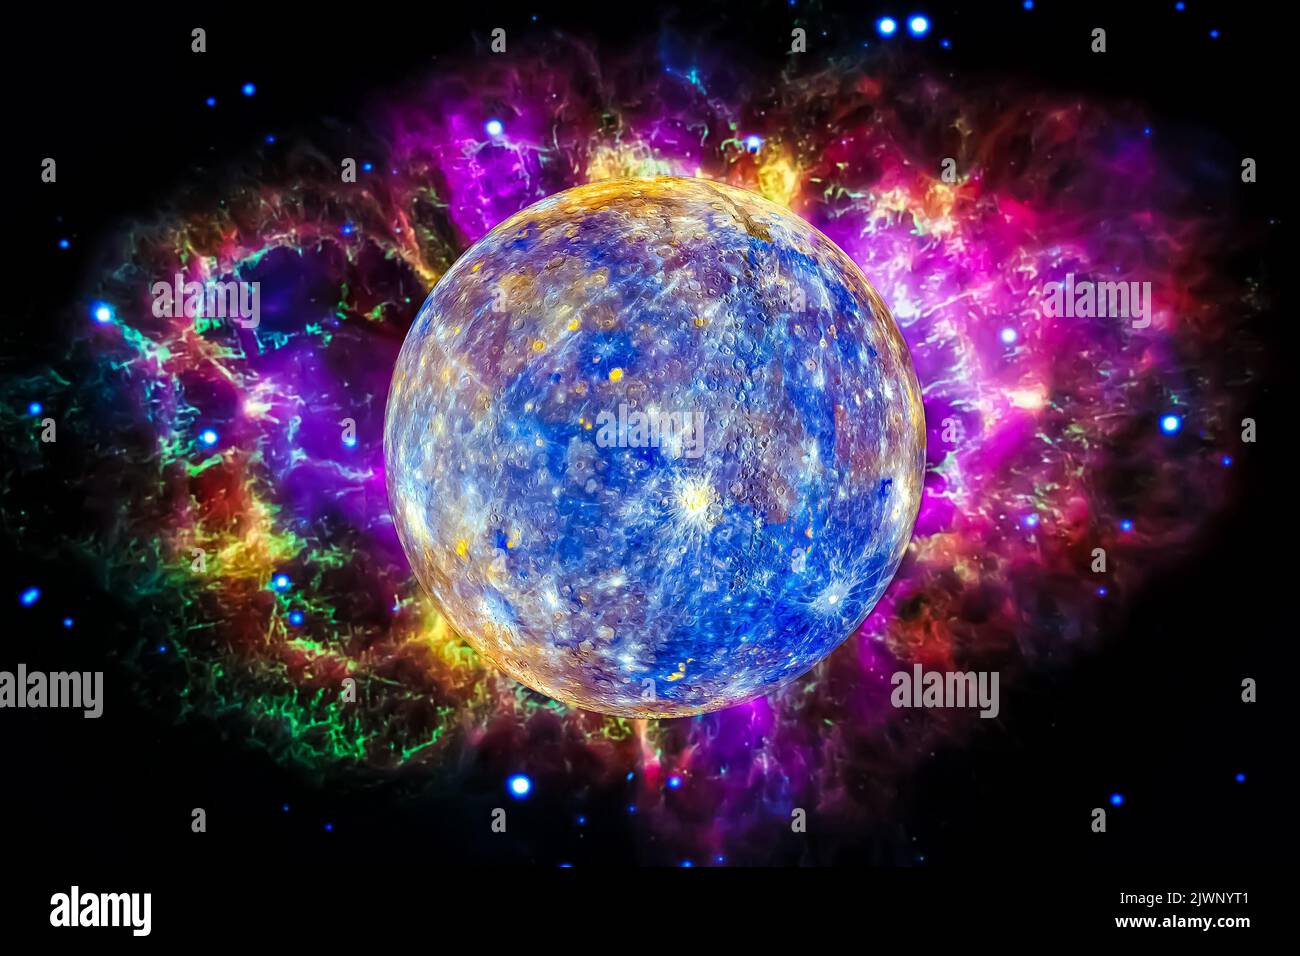 Mercury planet with colorful nebula. Space background. Elements of the image furnished by NASA. Stock Photo